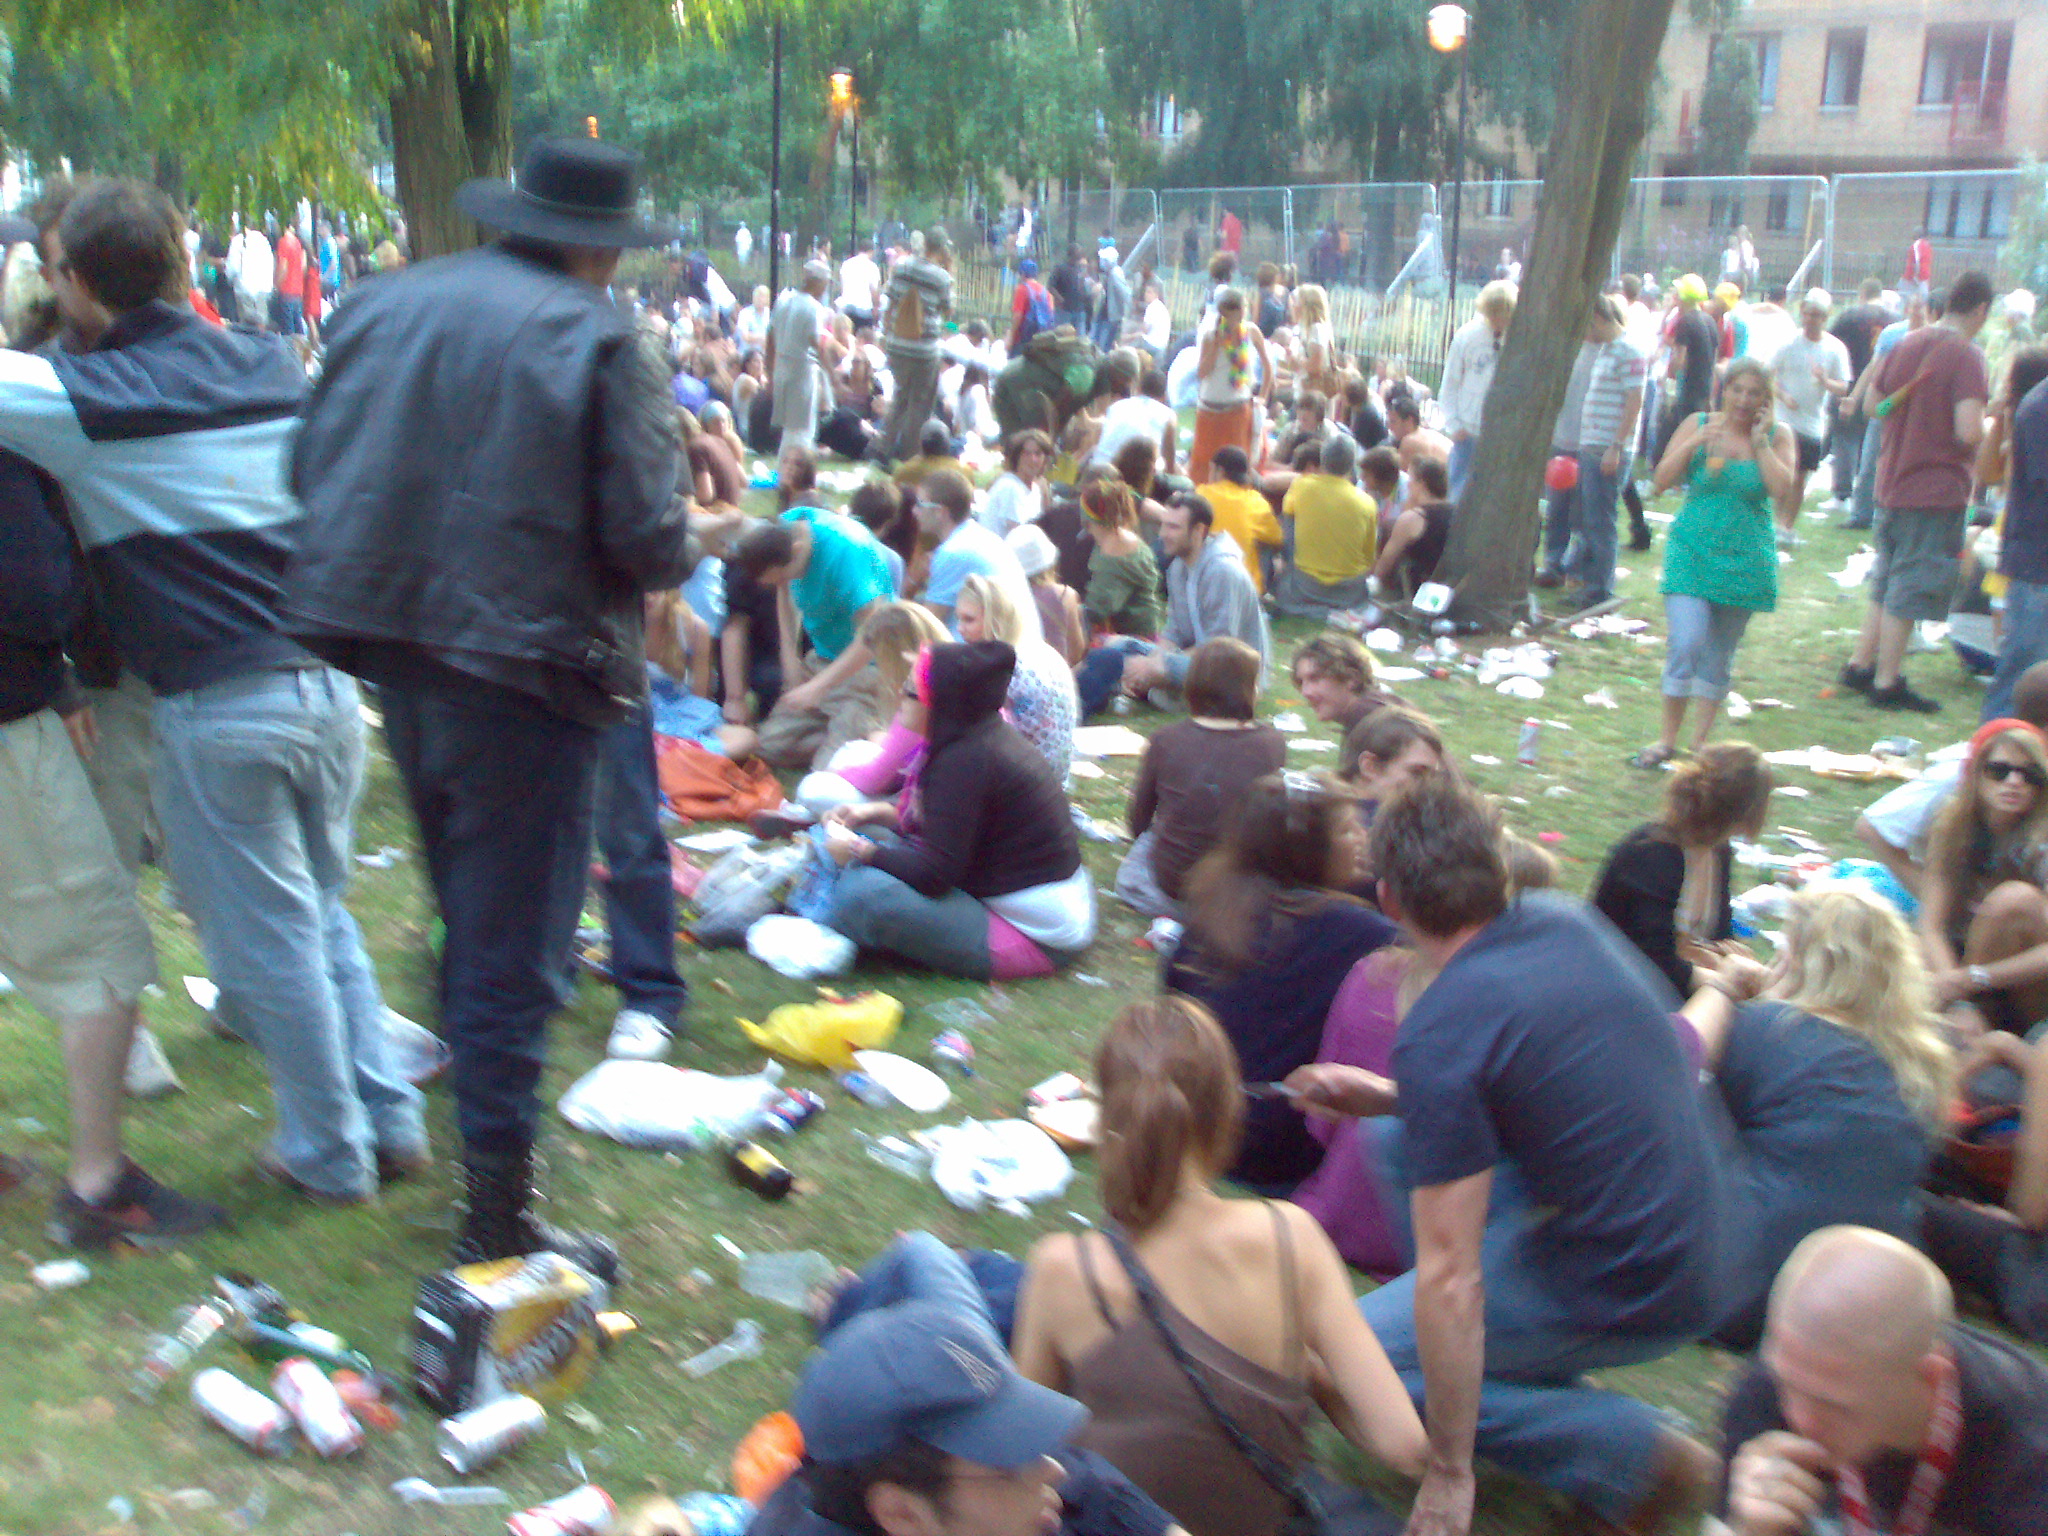 a large crowd of people is gathered in the park